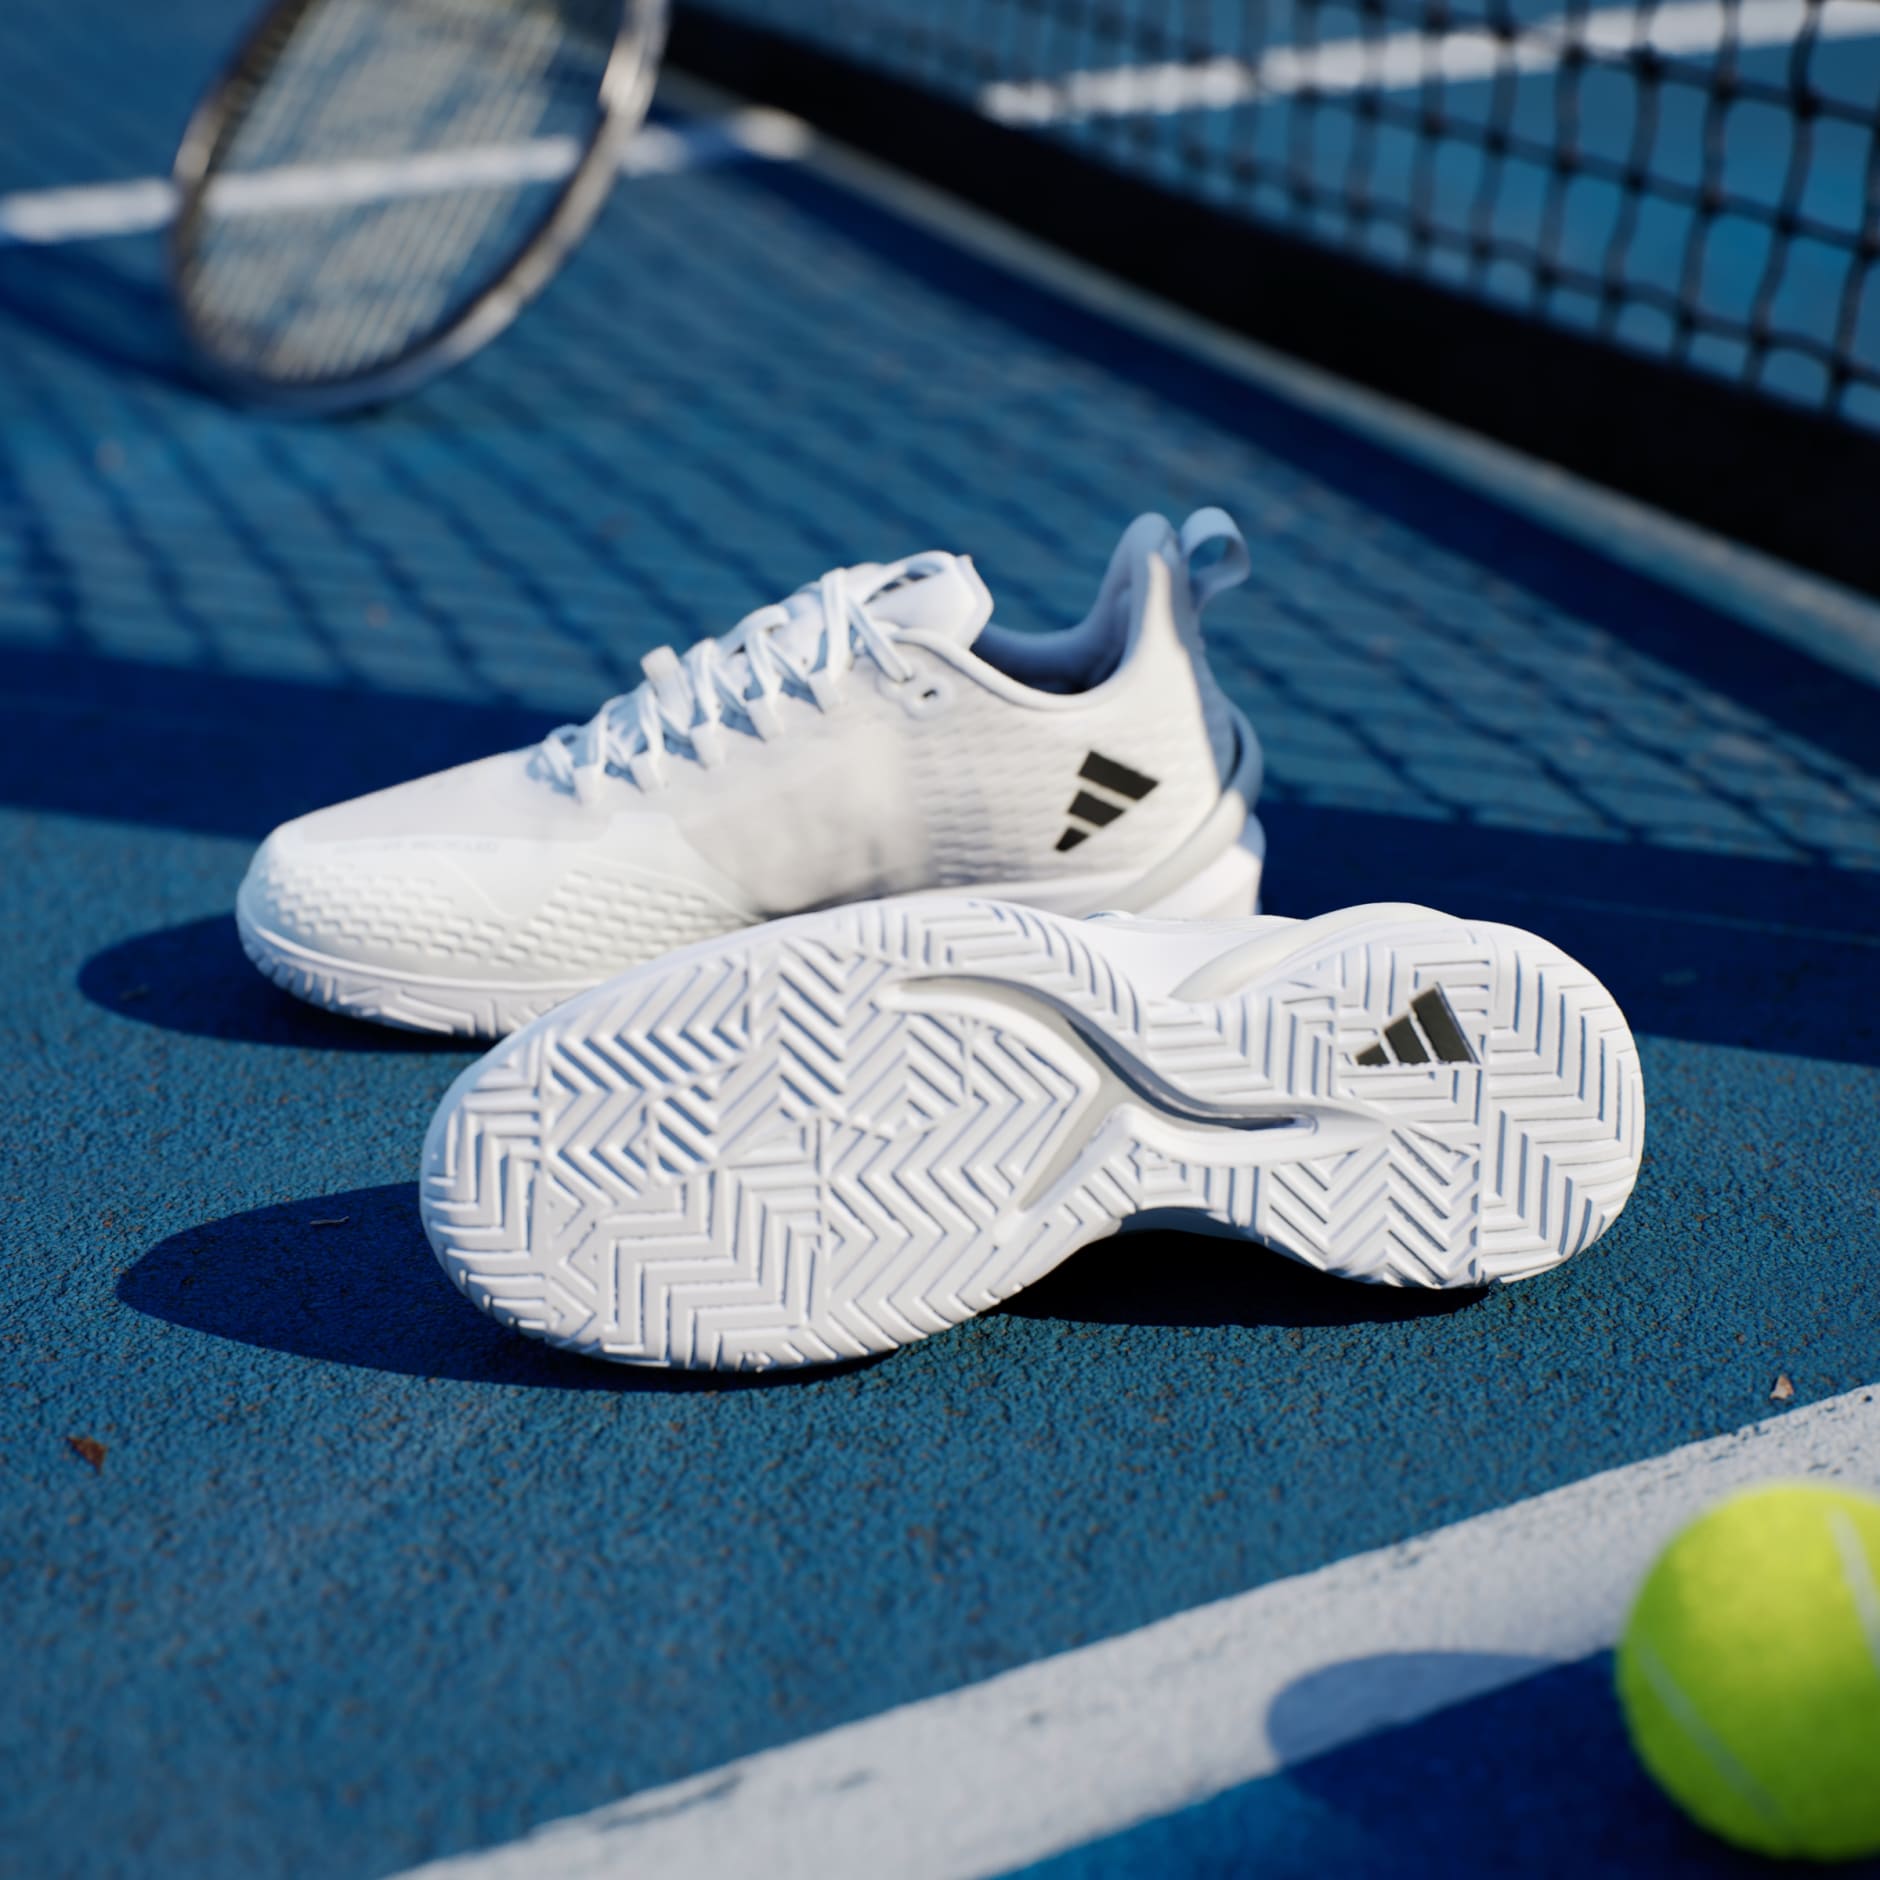 Shoes - adizero Cybersonic Tennis Shoes - White | adidas South Africa